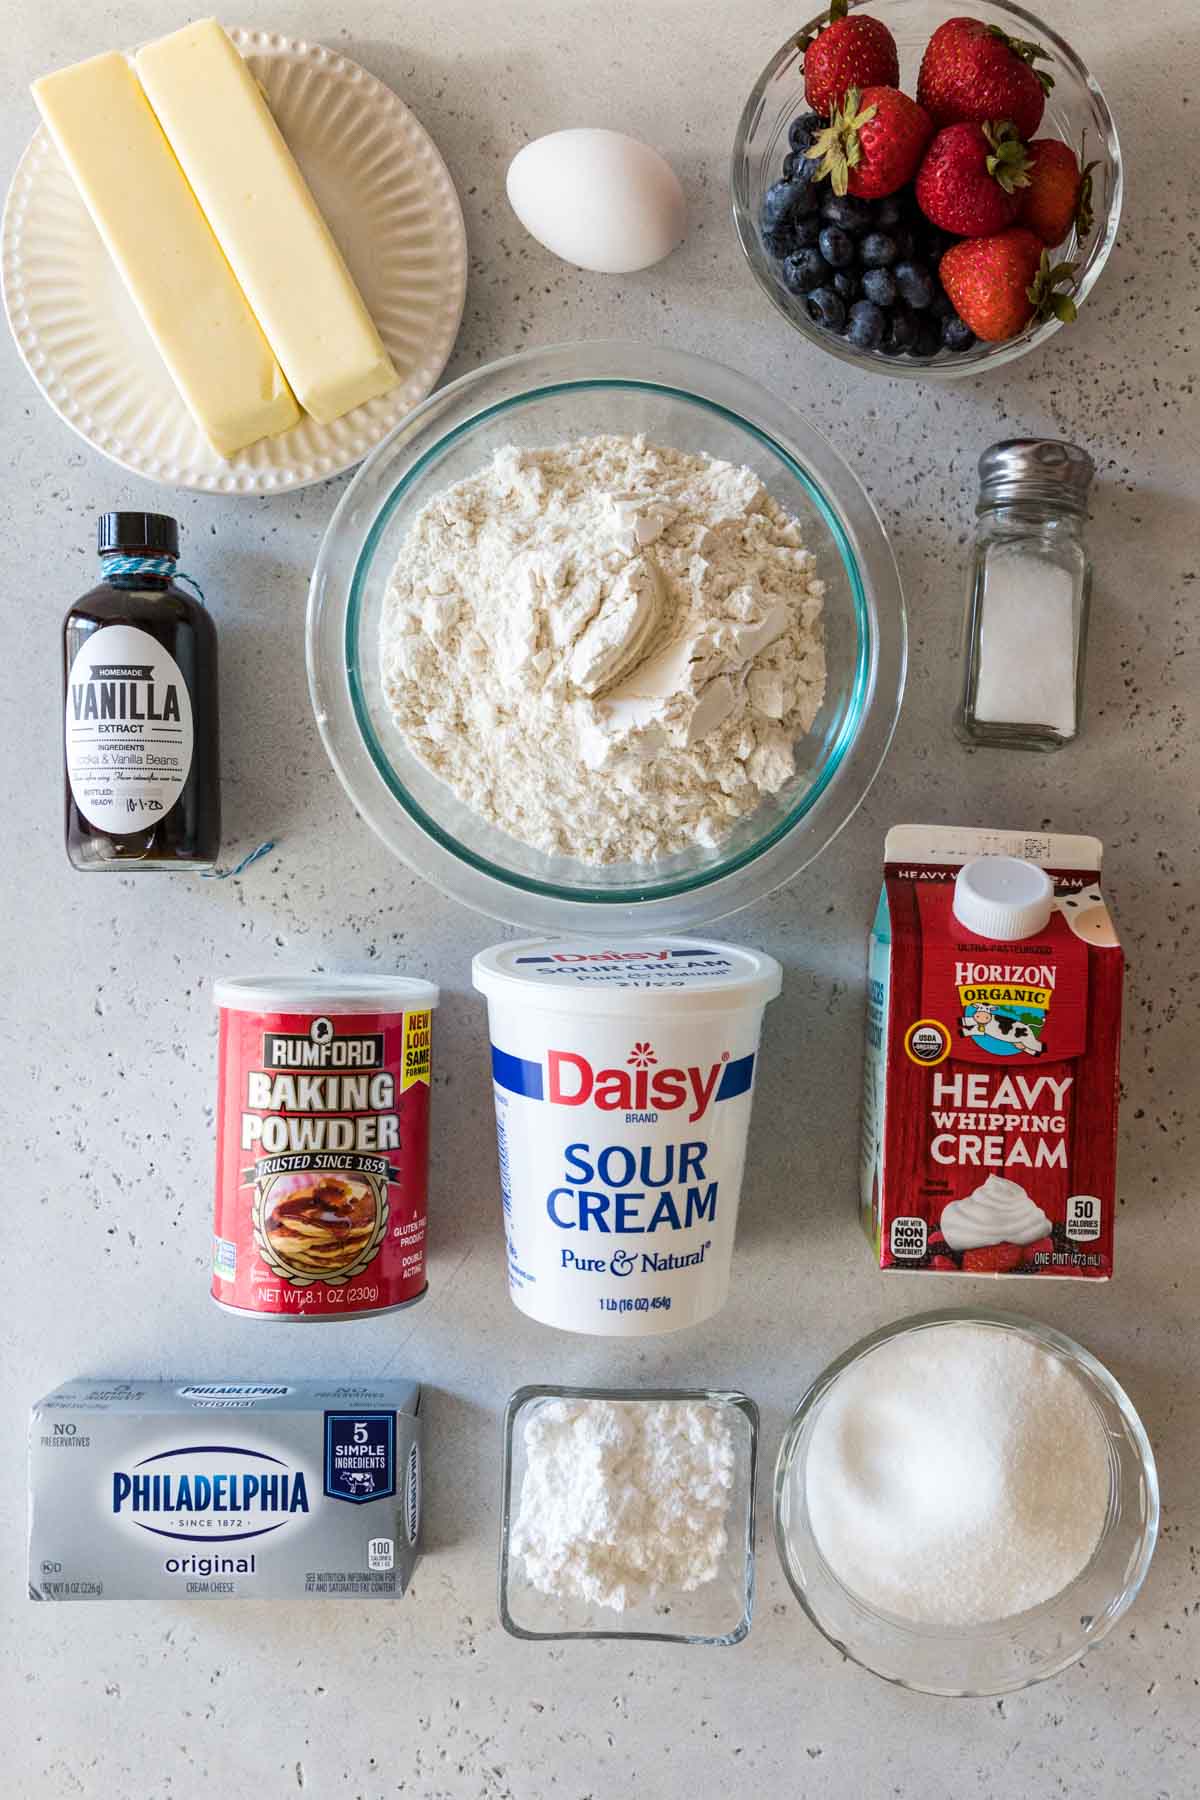 overhead view of ingredients including butter, sour cream, berries, heavy cream, cream cheese, and more